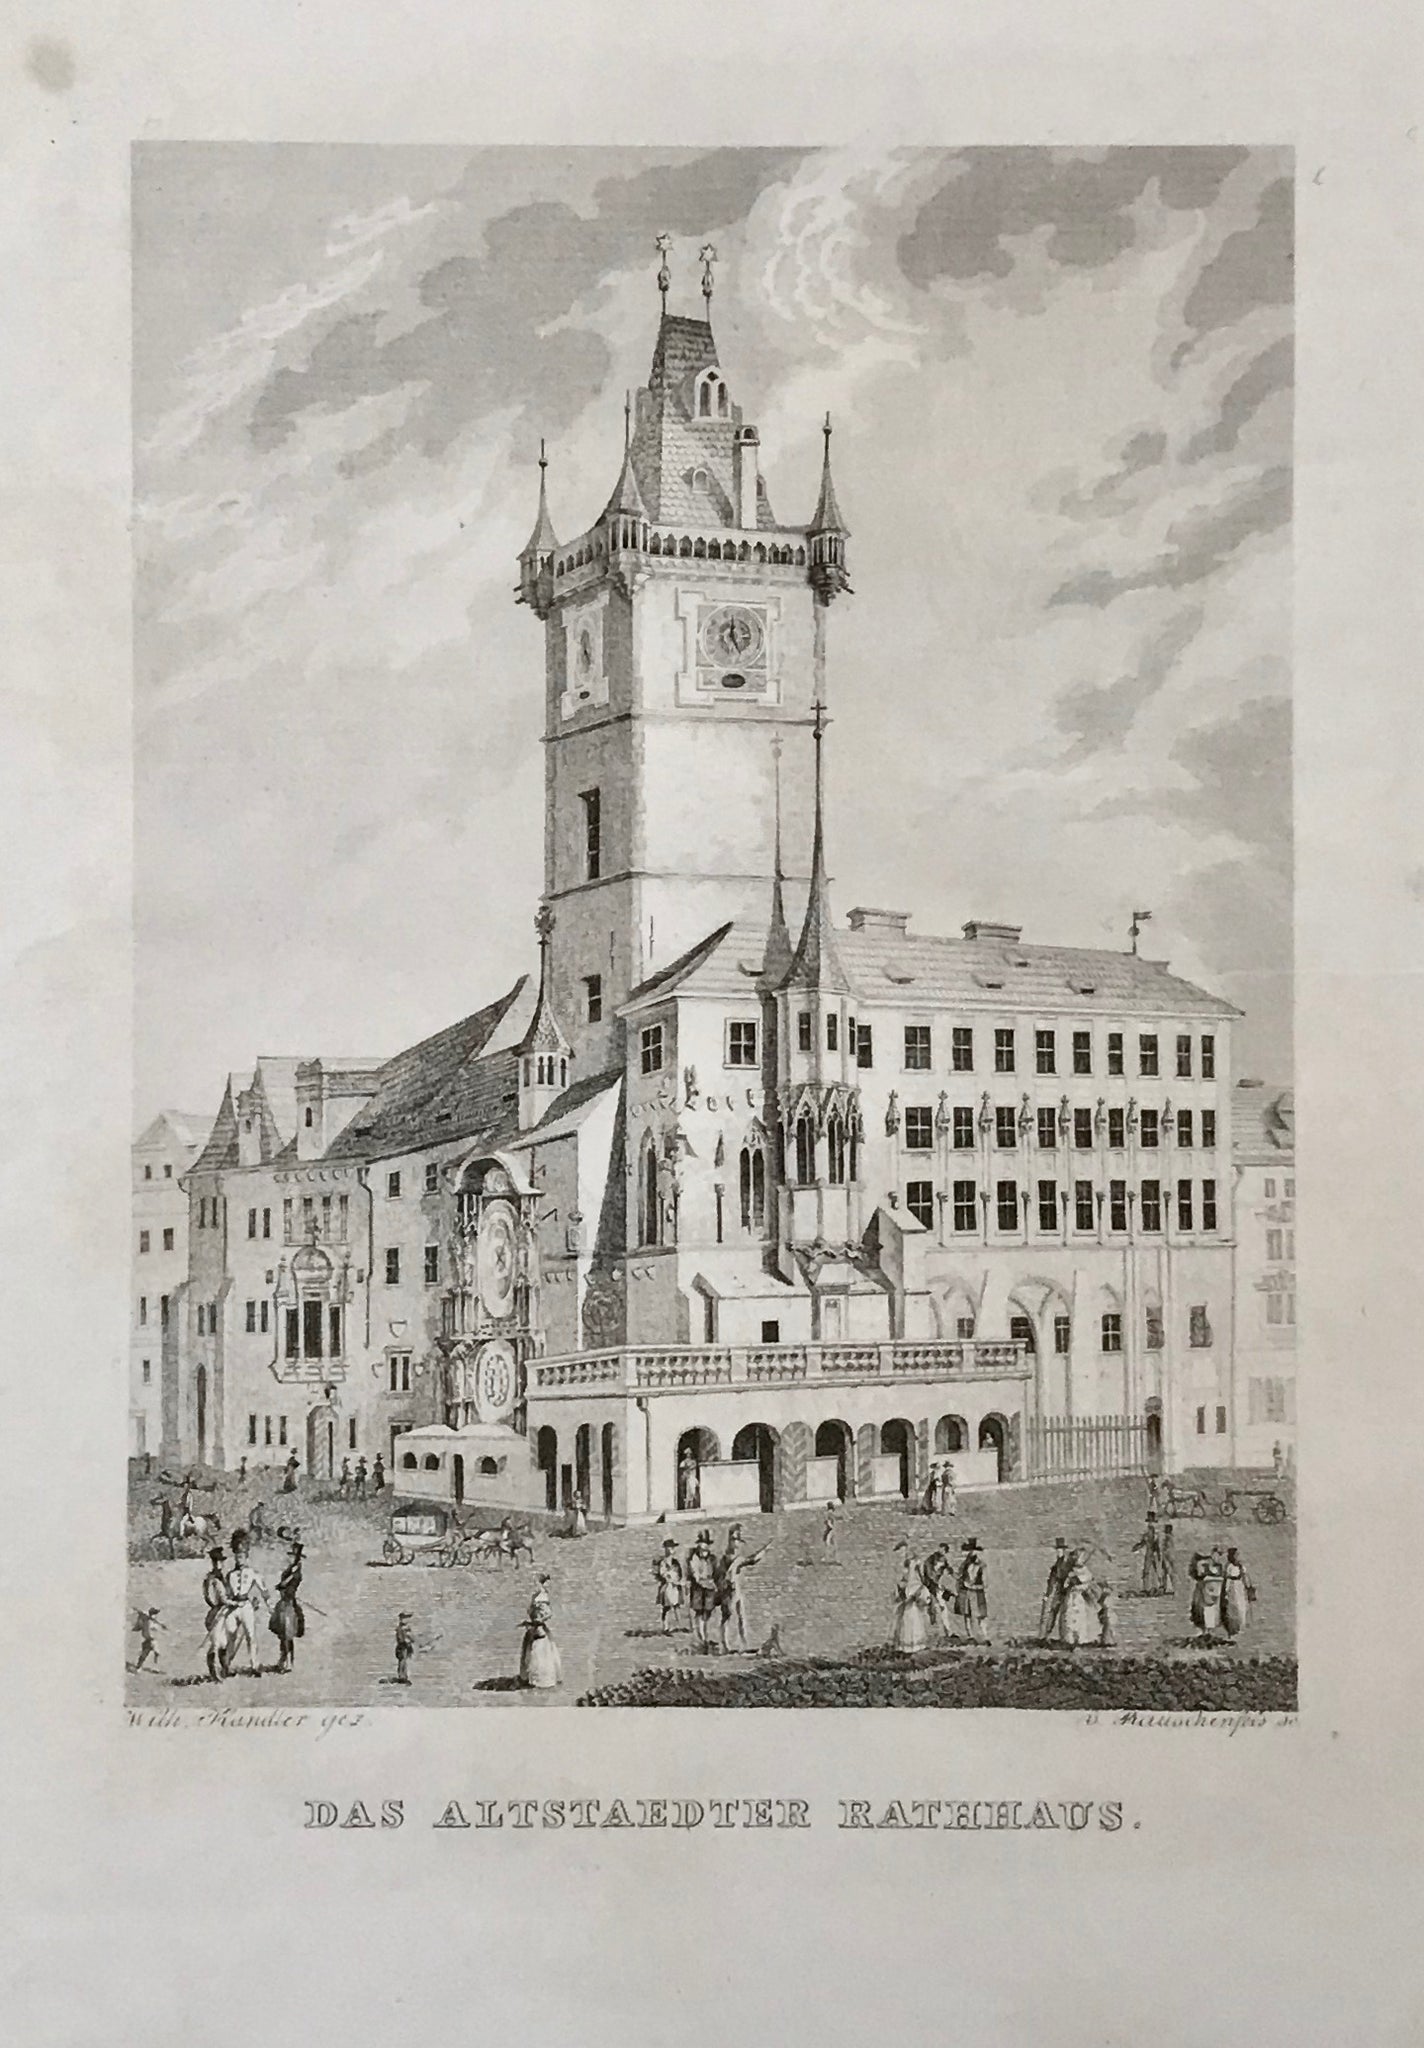 Das Altstaedter Rathaus  Etching by Rauschenfels after Kandler ca 1840. Print has a few light spots and small creases in the wide margins. One noticeable crease in right margin and 0.5 cm in image.